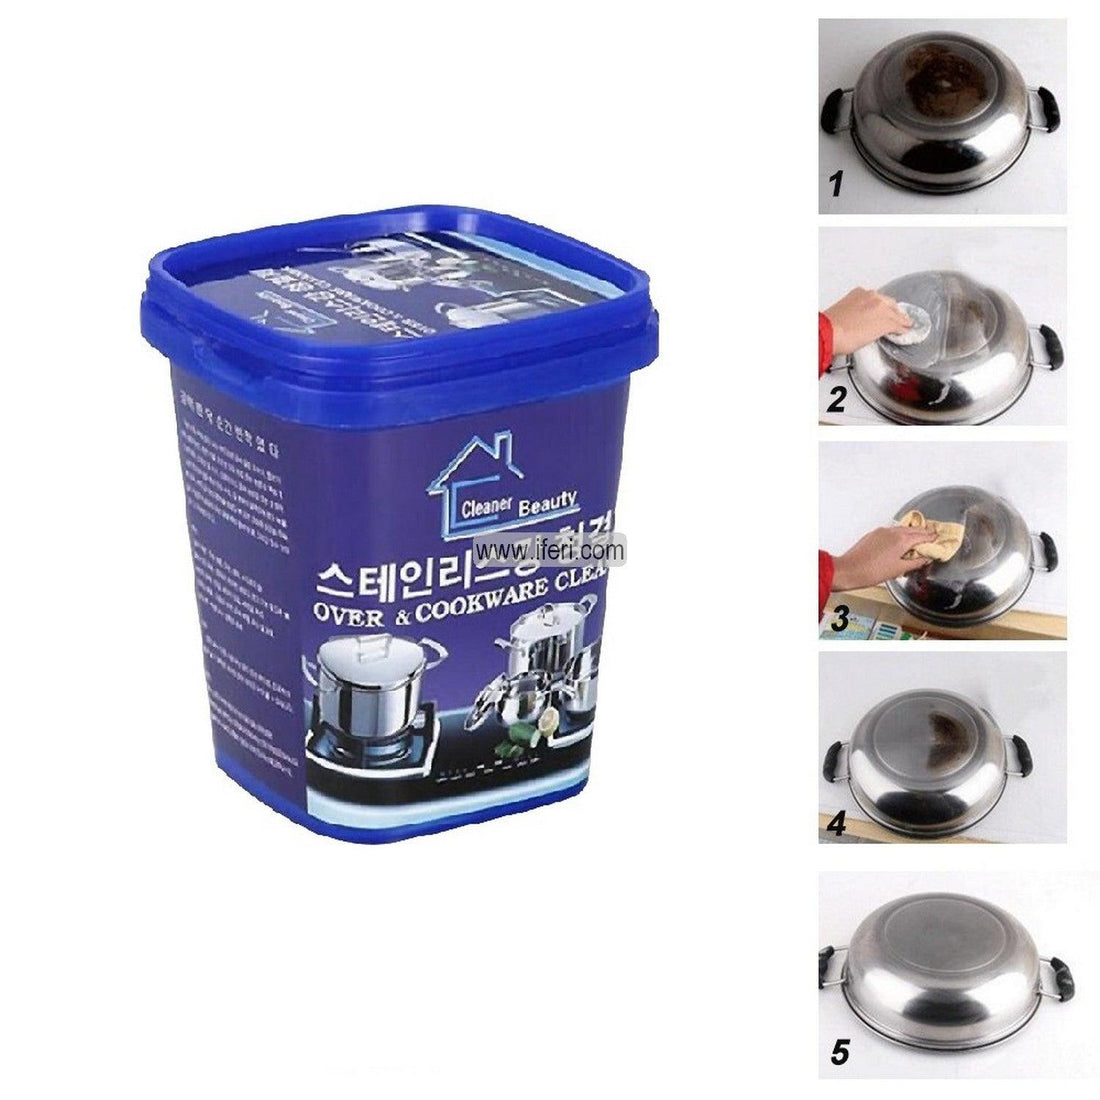 Stainless Steel Cookware Cleaner SN0709 Price in Bangladesh - iferi.com